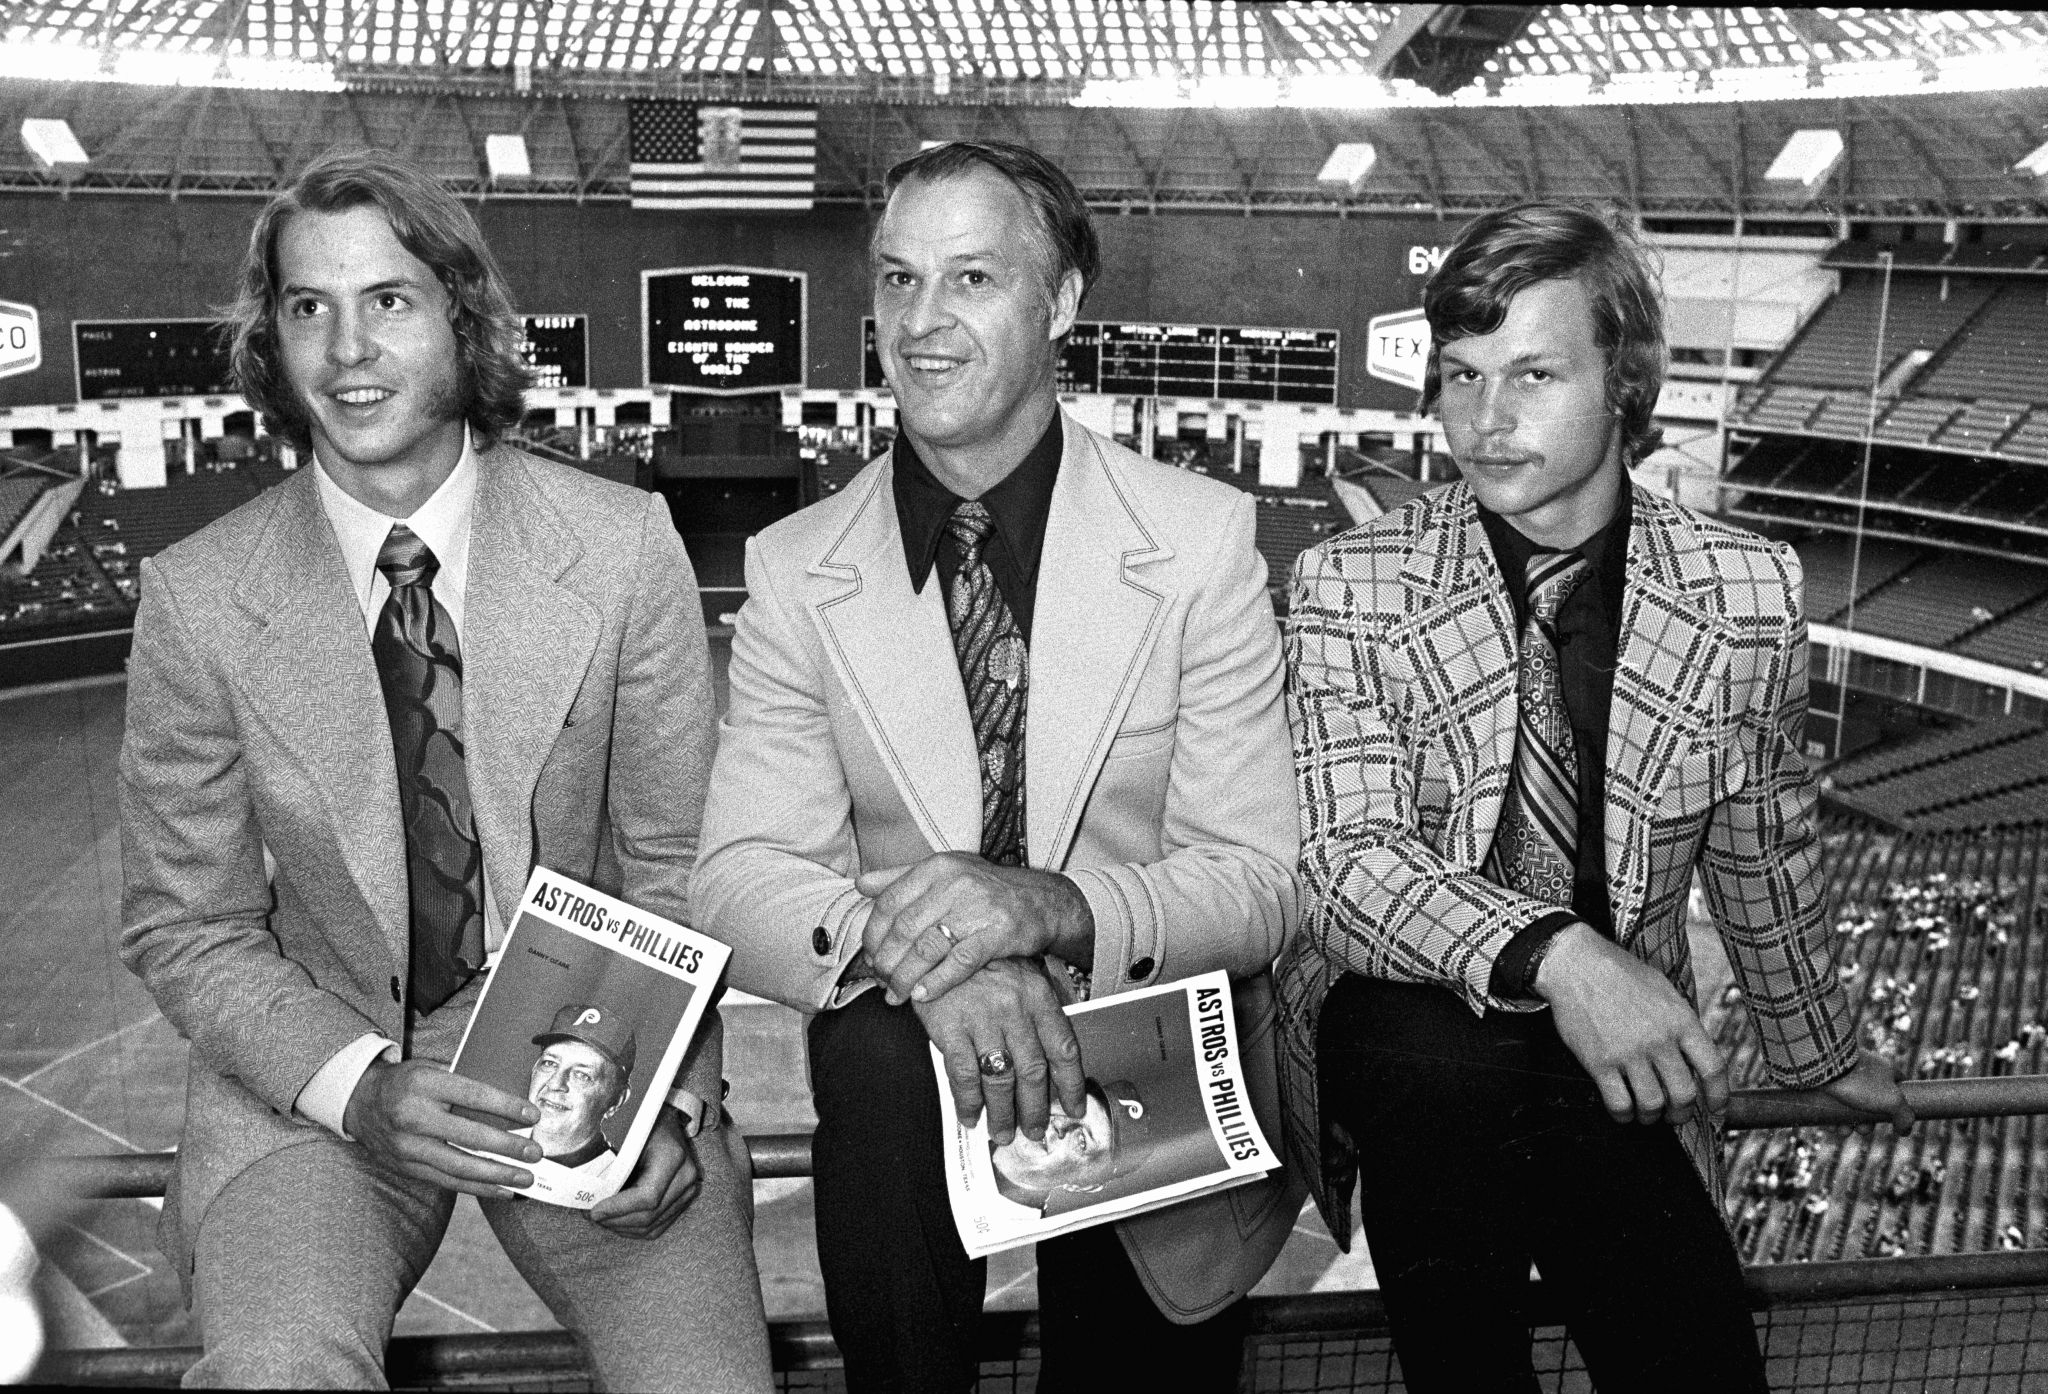 Tucson Sports History: NHL legend, Gordie Howe visited Tucson Arena to  promote Tucson's first minor league hockey team